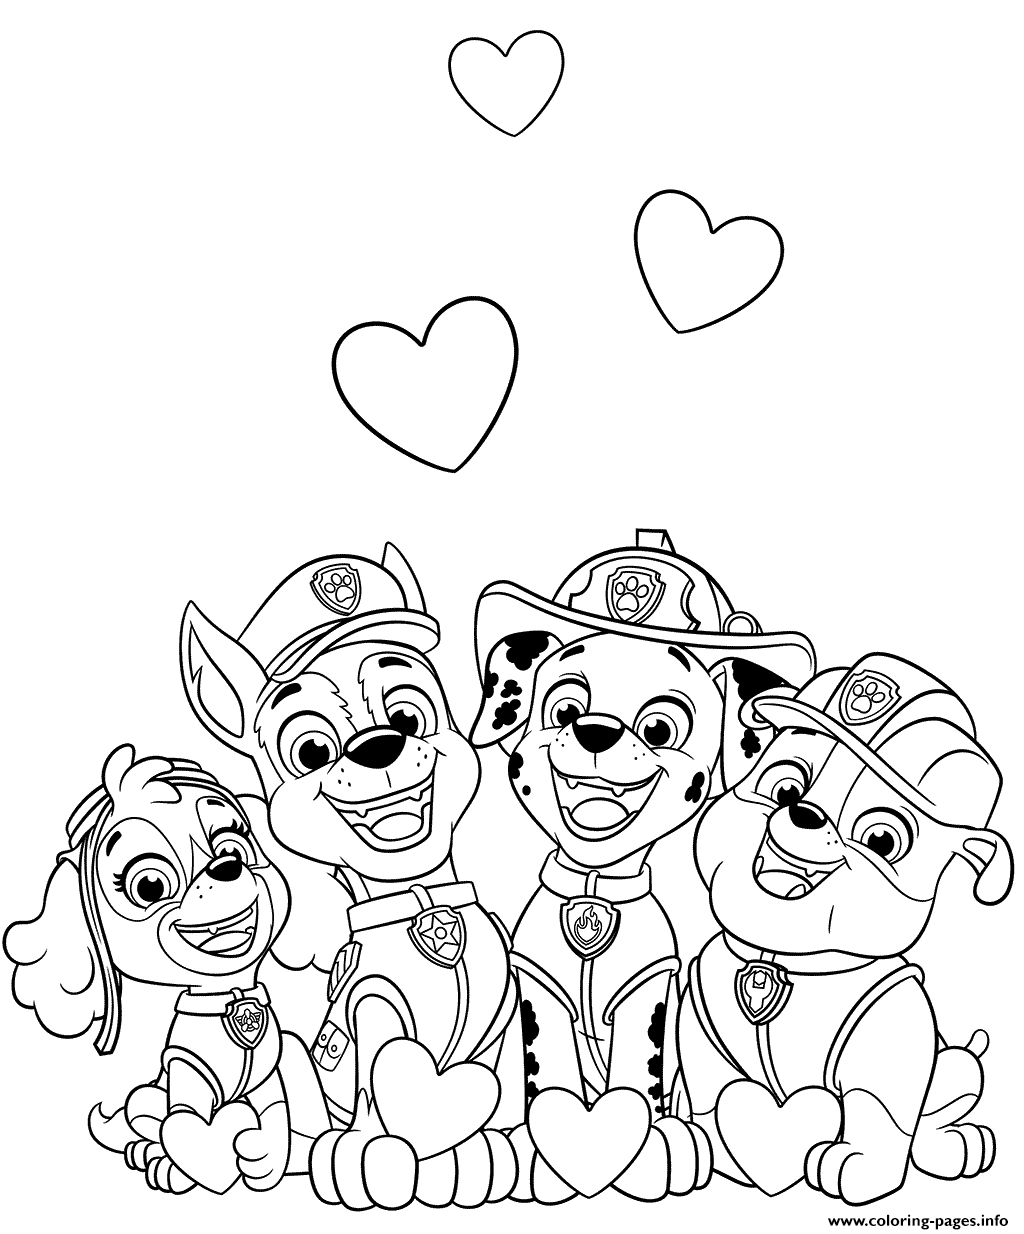 Printable Paw Patrol Valentines Coloring Pages